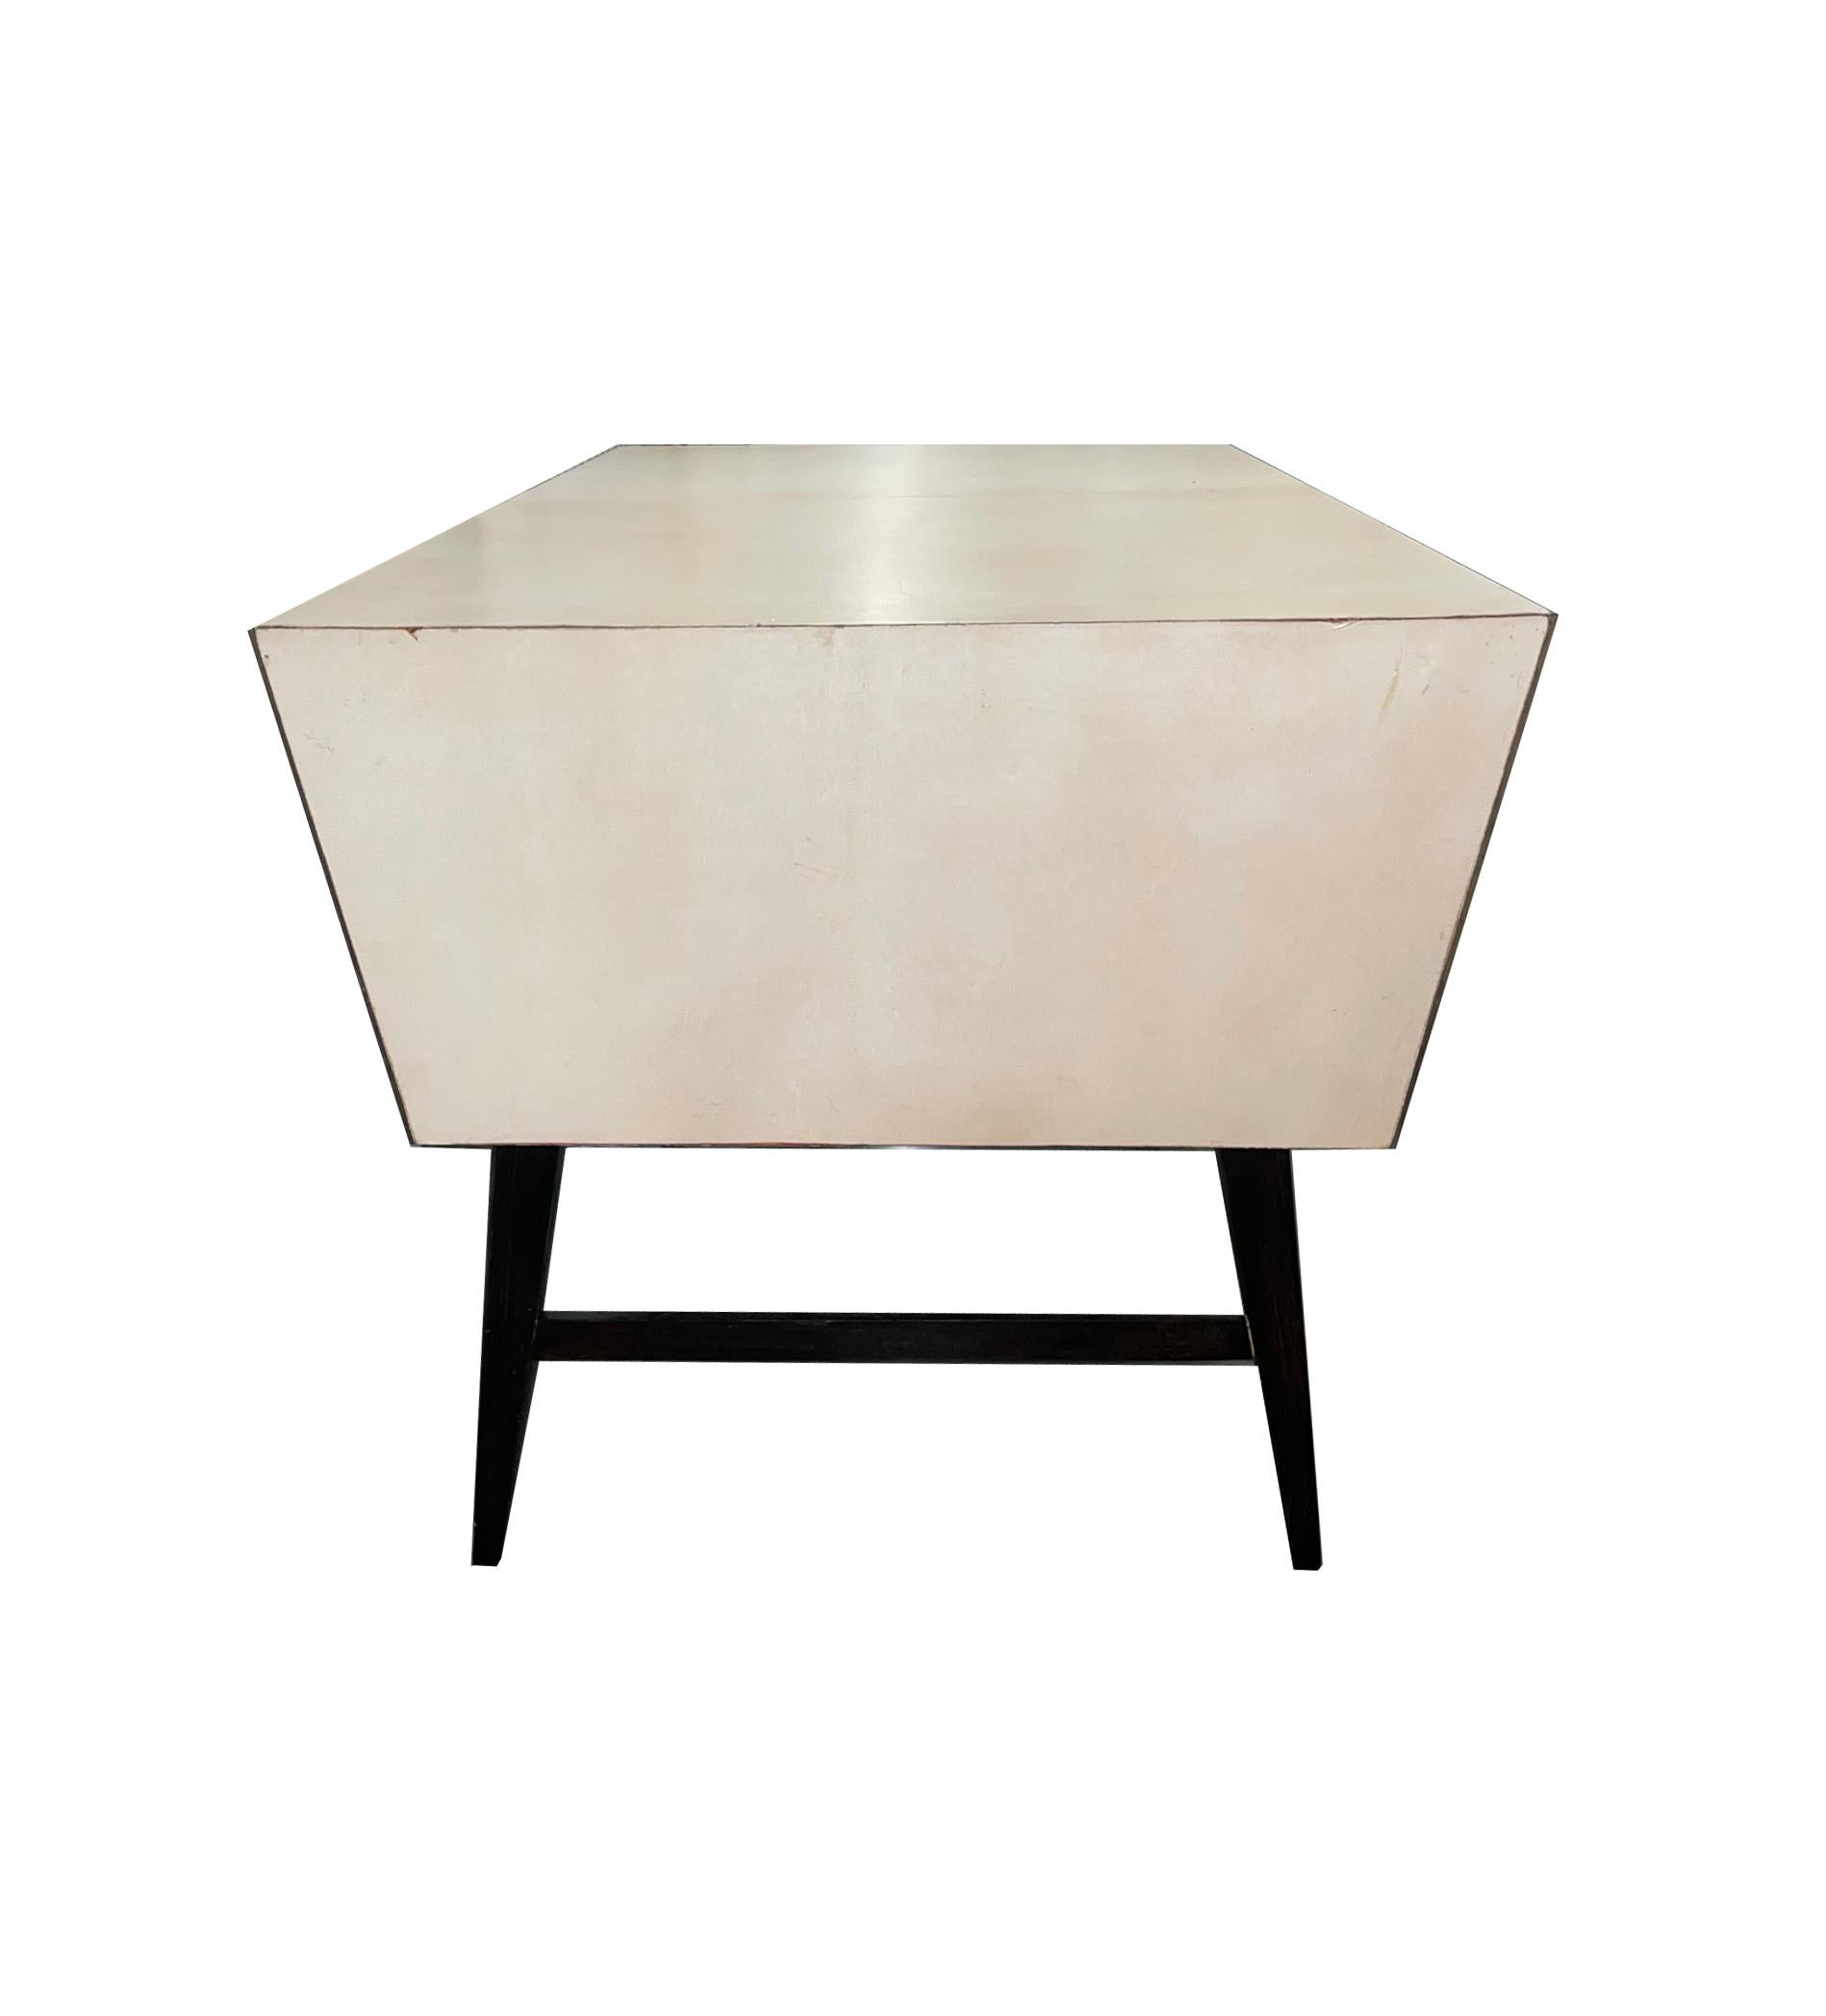 North American Midcentury Goat Skin Wrapped Desk For Sale